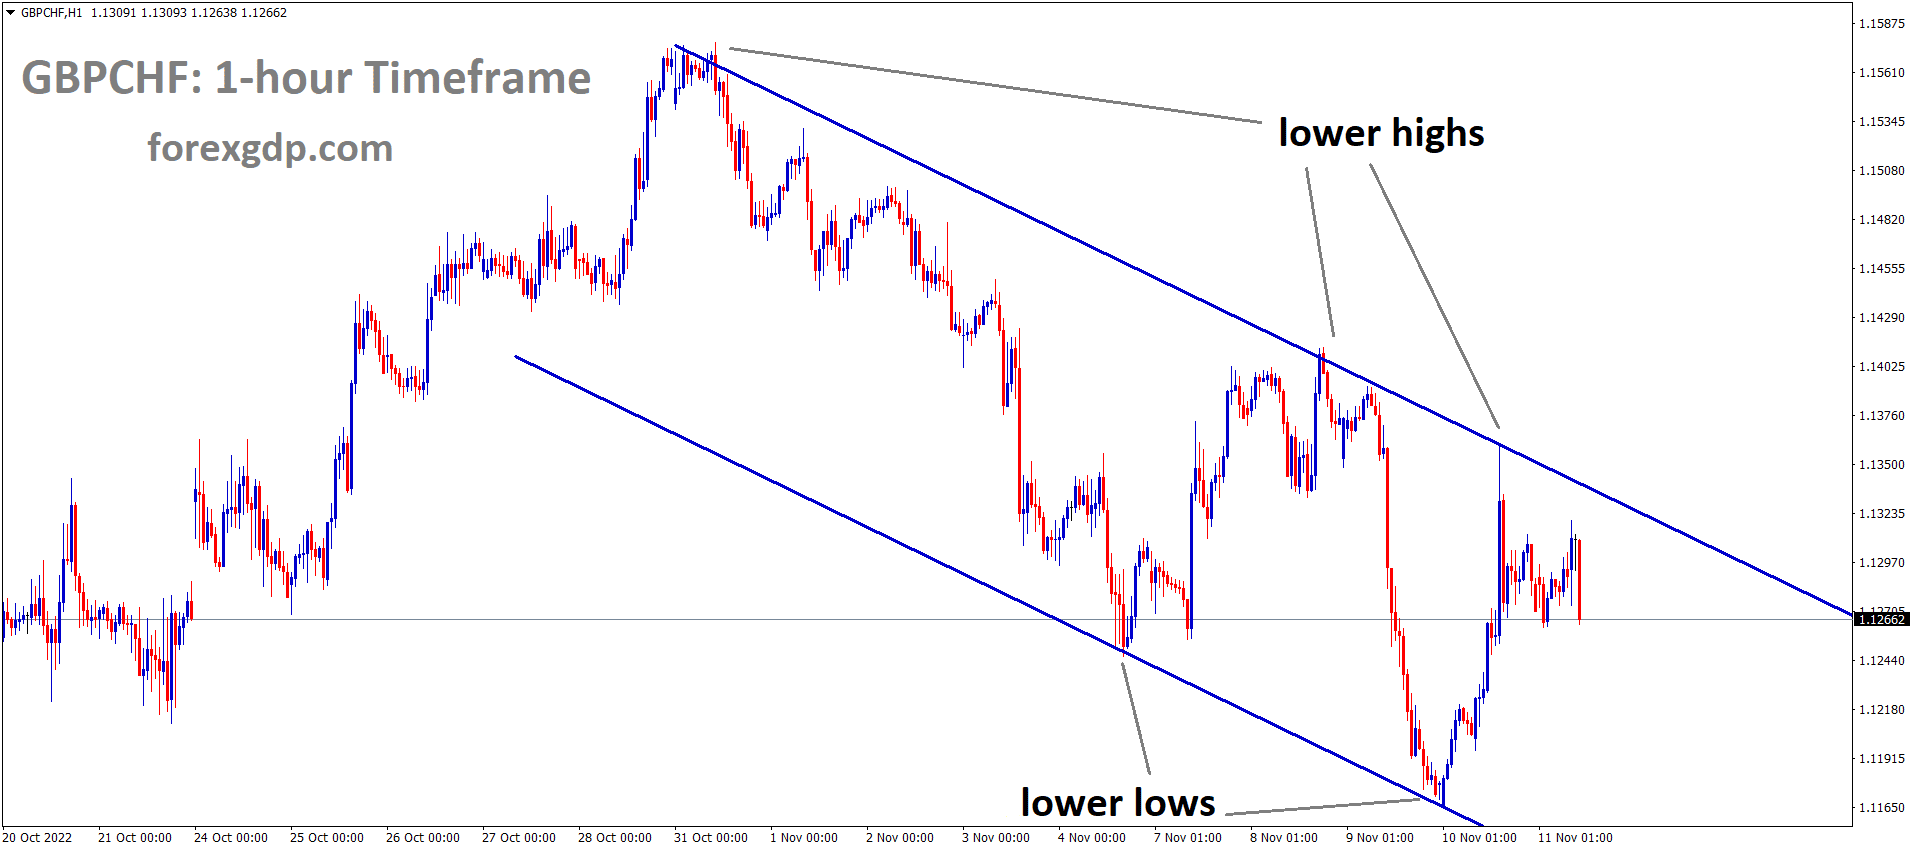 GBPCHF is moving in the Descending channel and the market has fallen from the lower high area of the channel